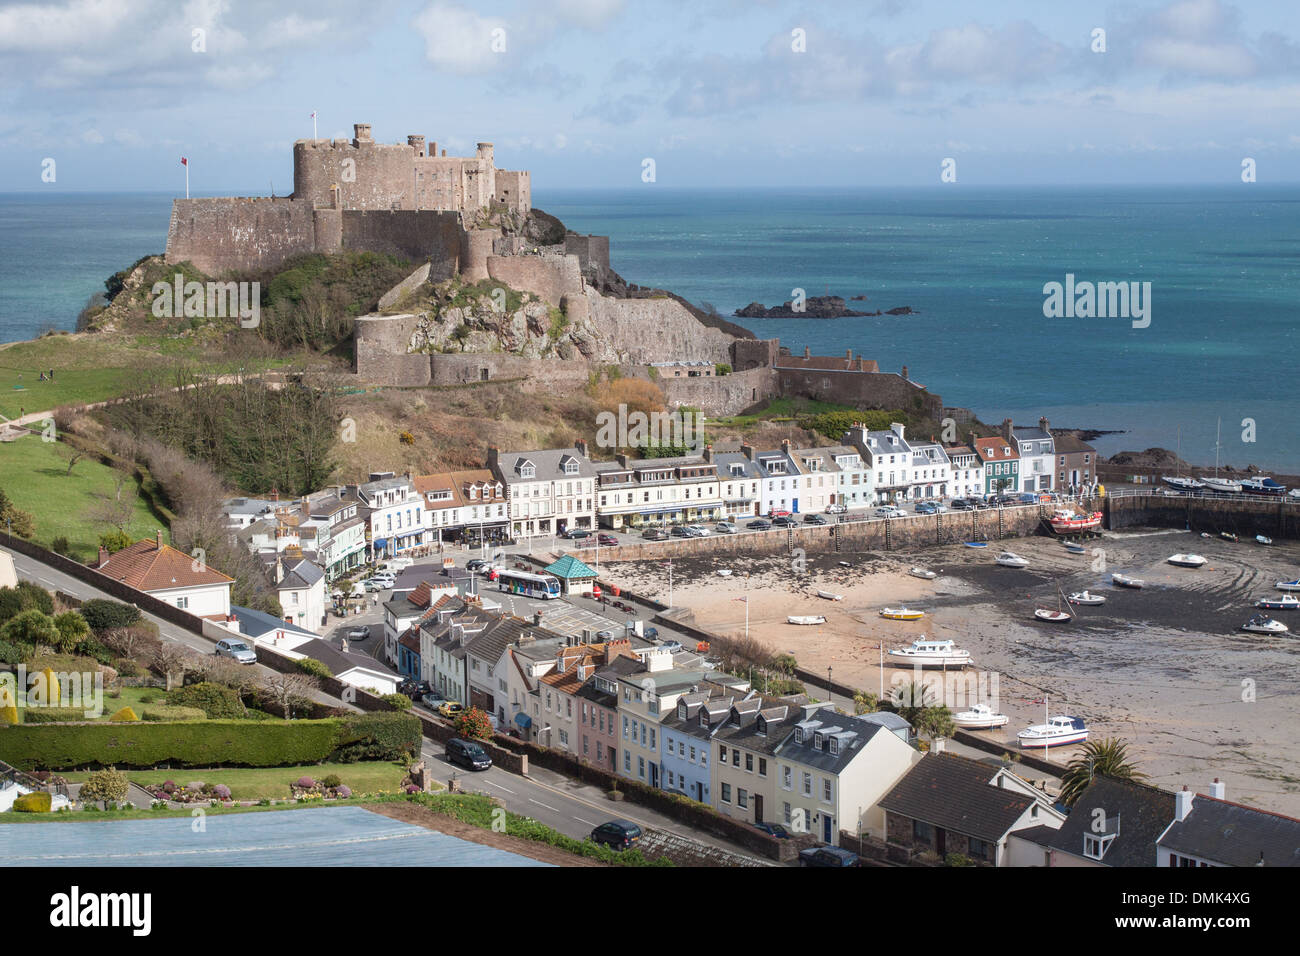 VIEW OF THE PORT OF GOREY AND THE FORTIFIED CASTLE OF MONT-ORGUEIL BUILT IN THE 13TH CENTURY, JERSEY, CHANNEL ISLANDS Stock Photo